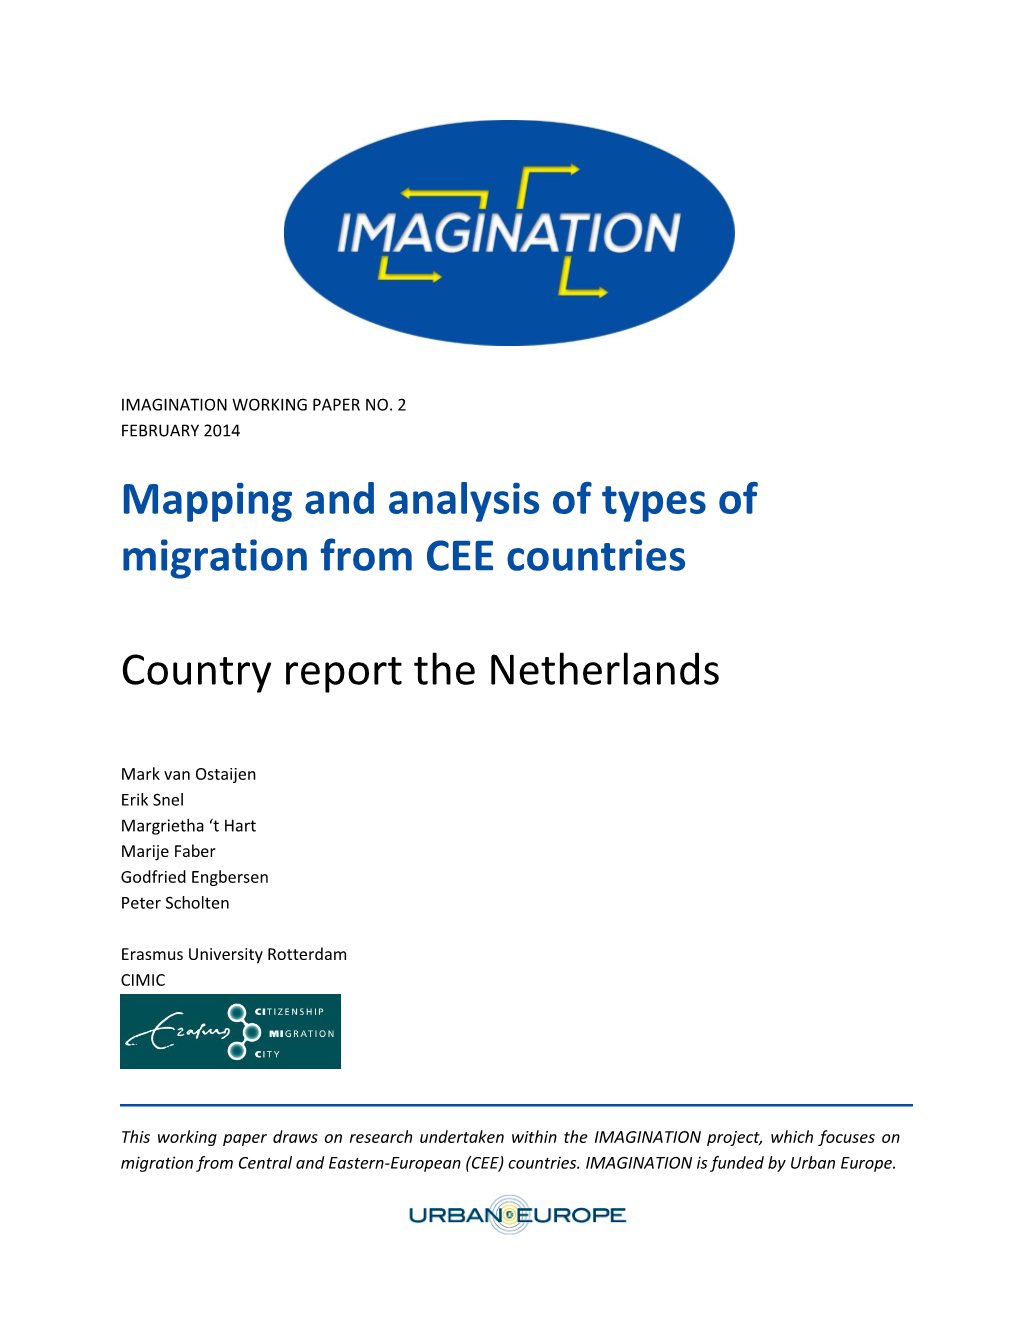 Mapping and Analysis of Types of Migration from CEE Countries